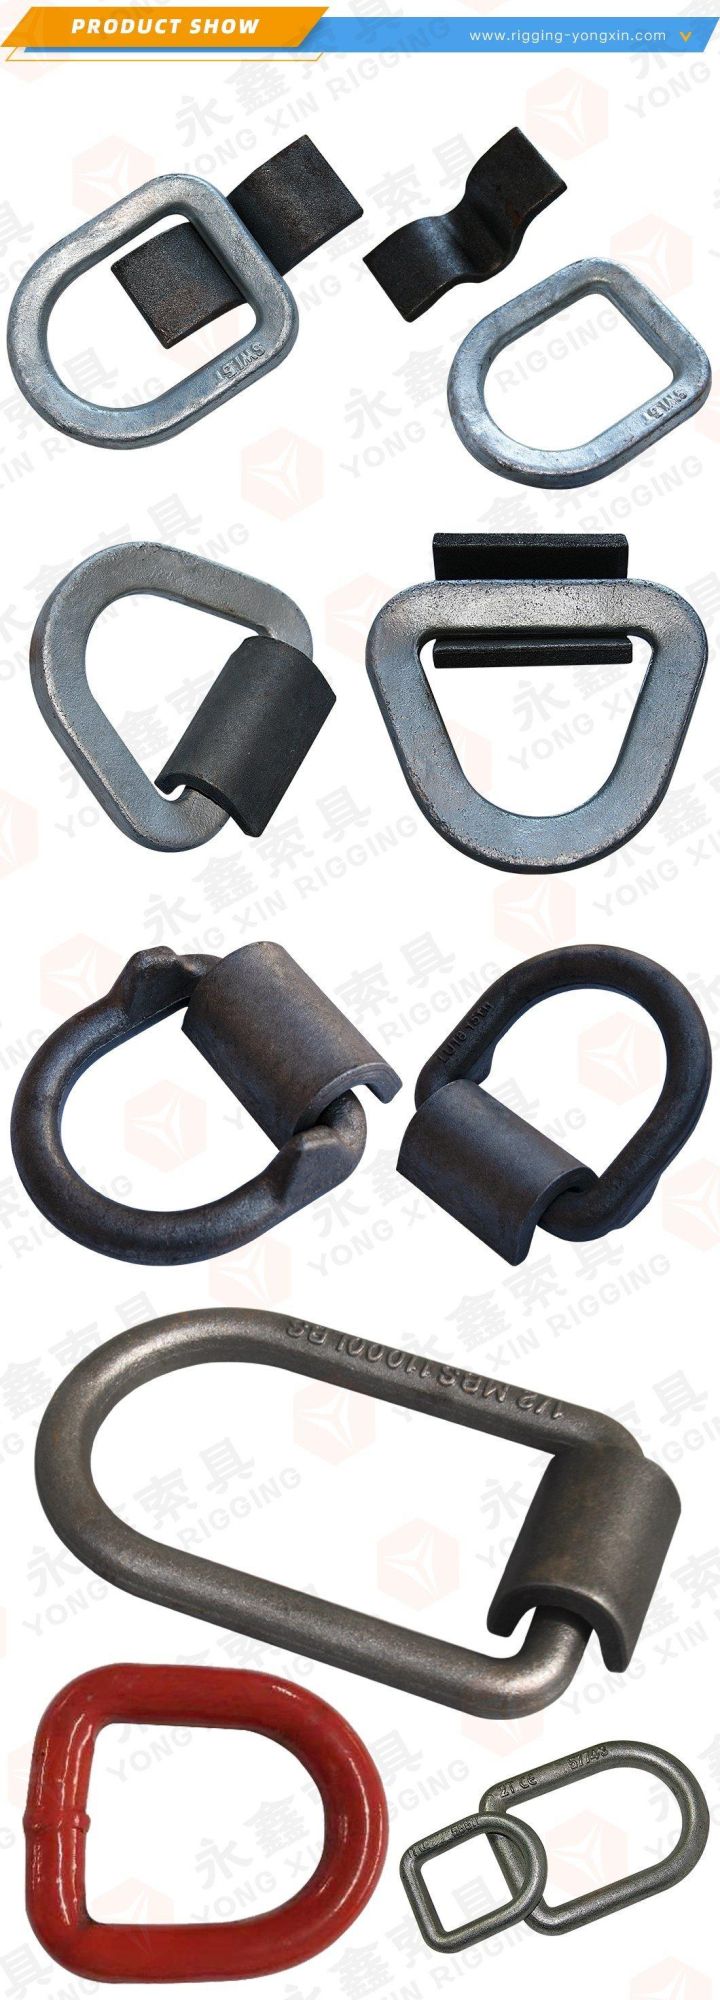 1/2" Wll 11000lbs Strap Type a Forged D Link D Ring|Customized Forged Lashing D Ring